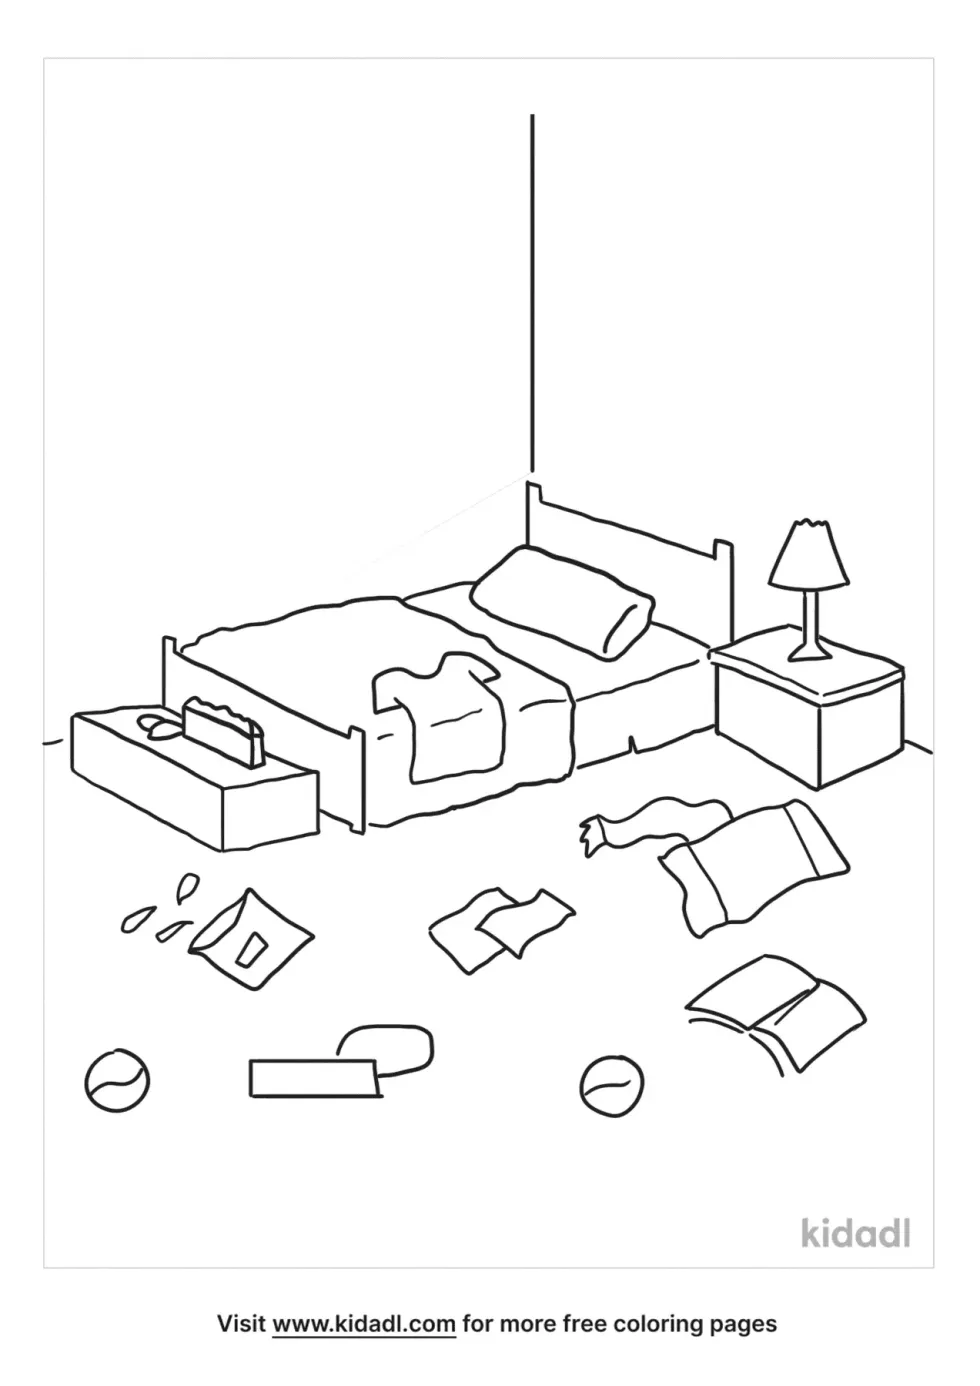 Messy Room Coloring Page